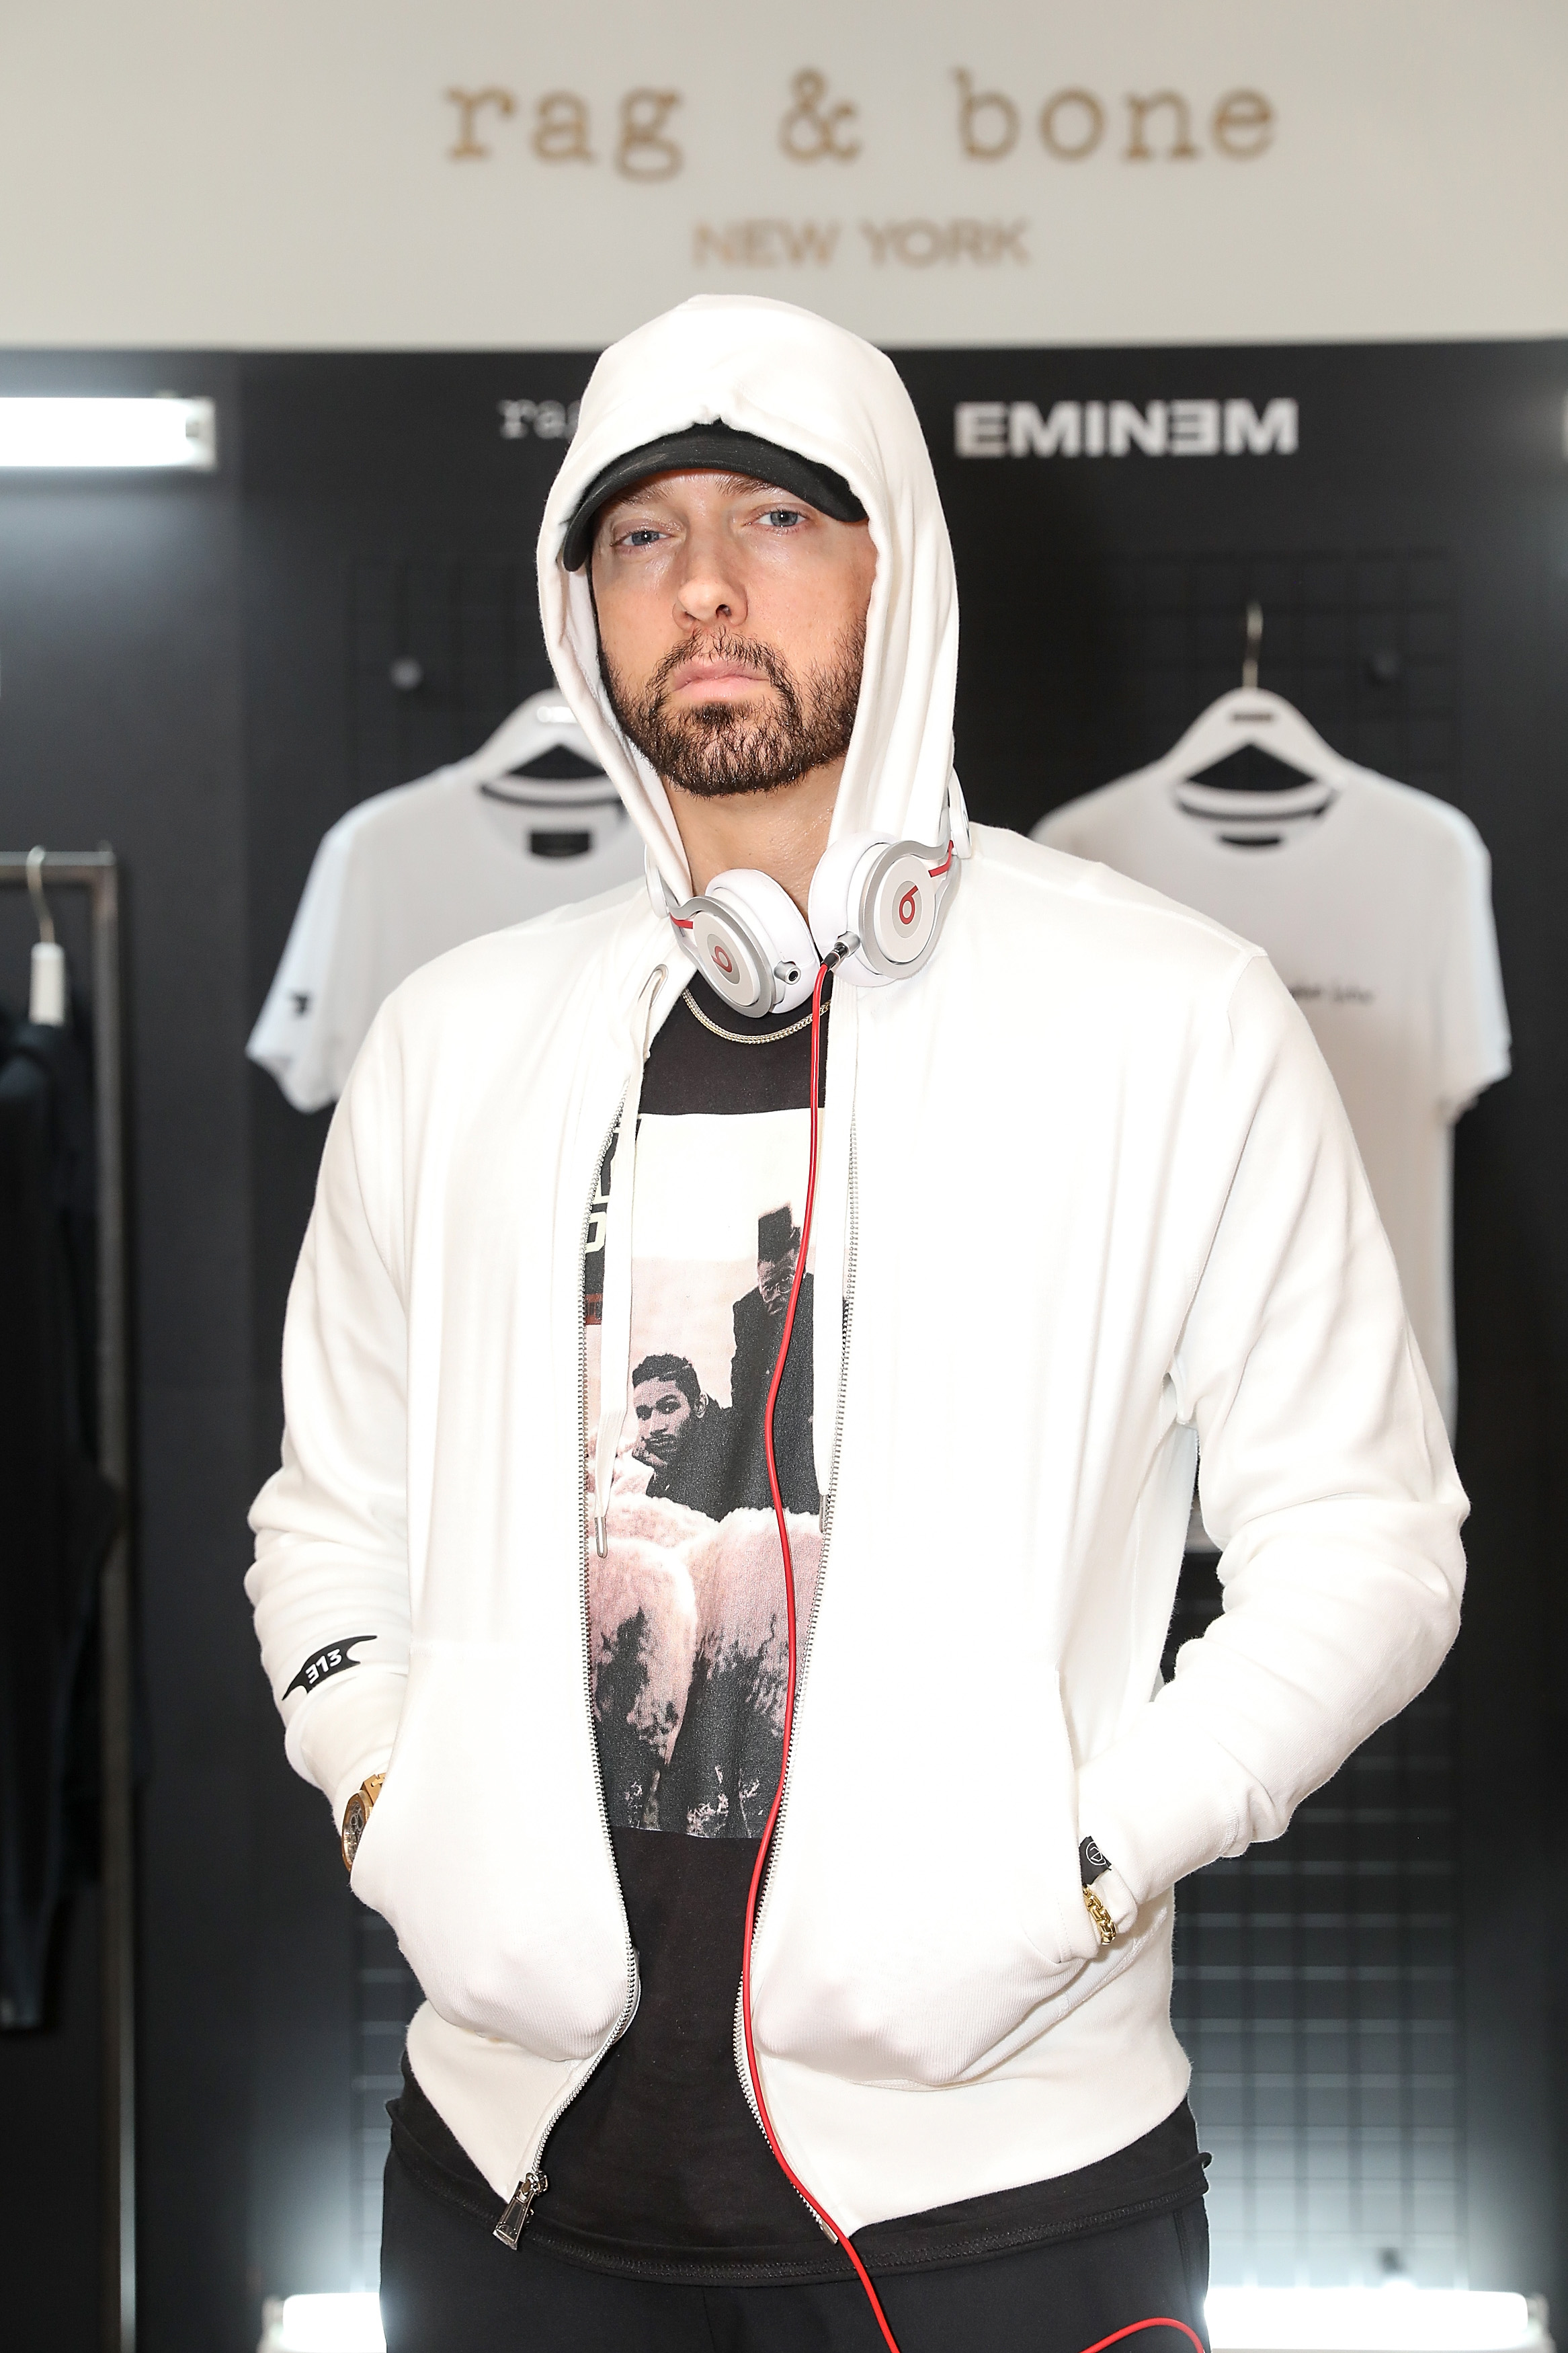 Eminem at the rag & bone X Eminem London Pop-Up Opening on July 13, 2018, in London, England. | Source: Getty Images